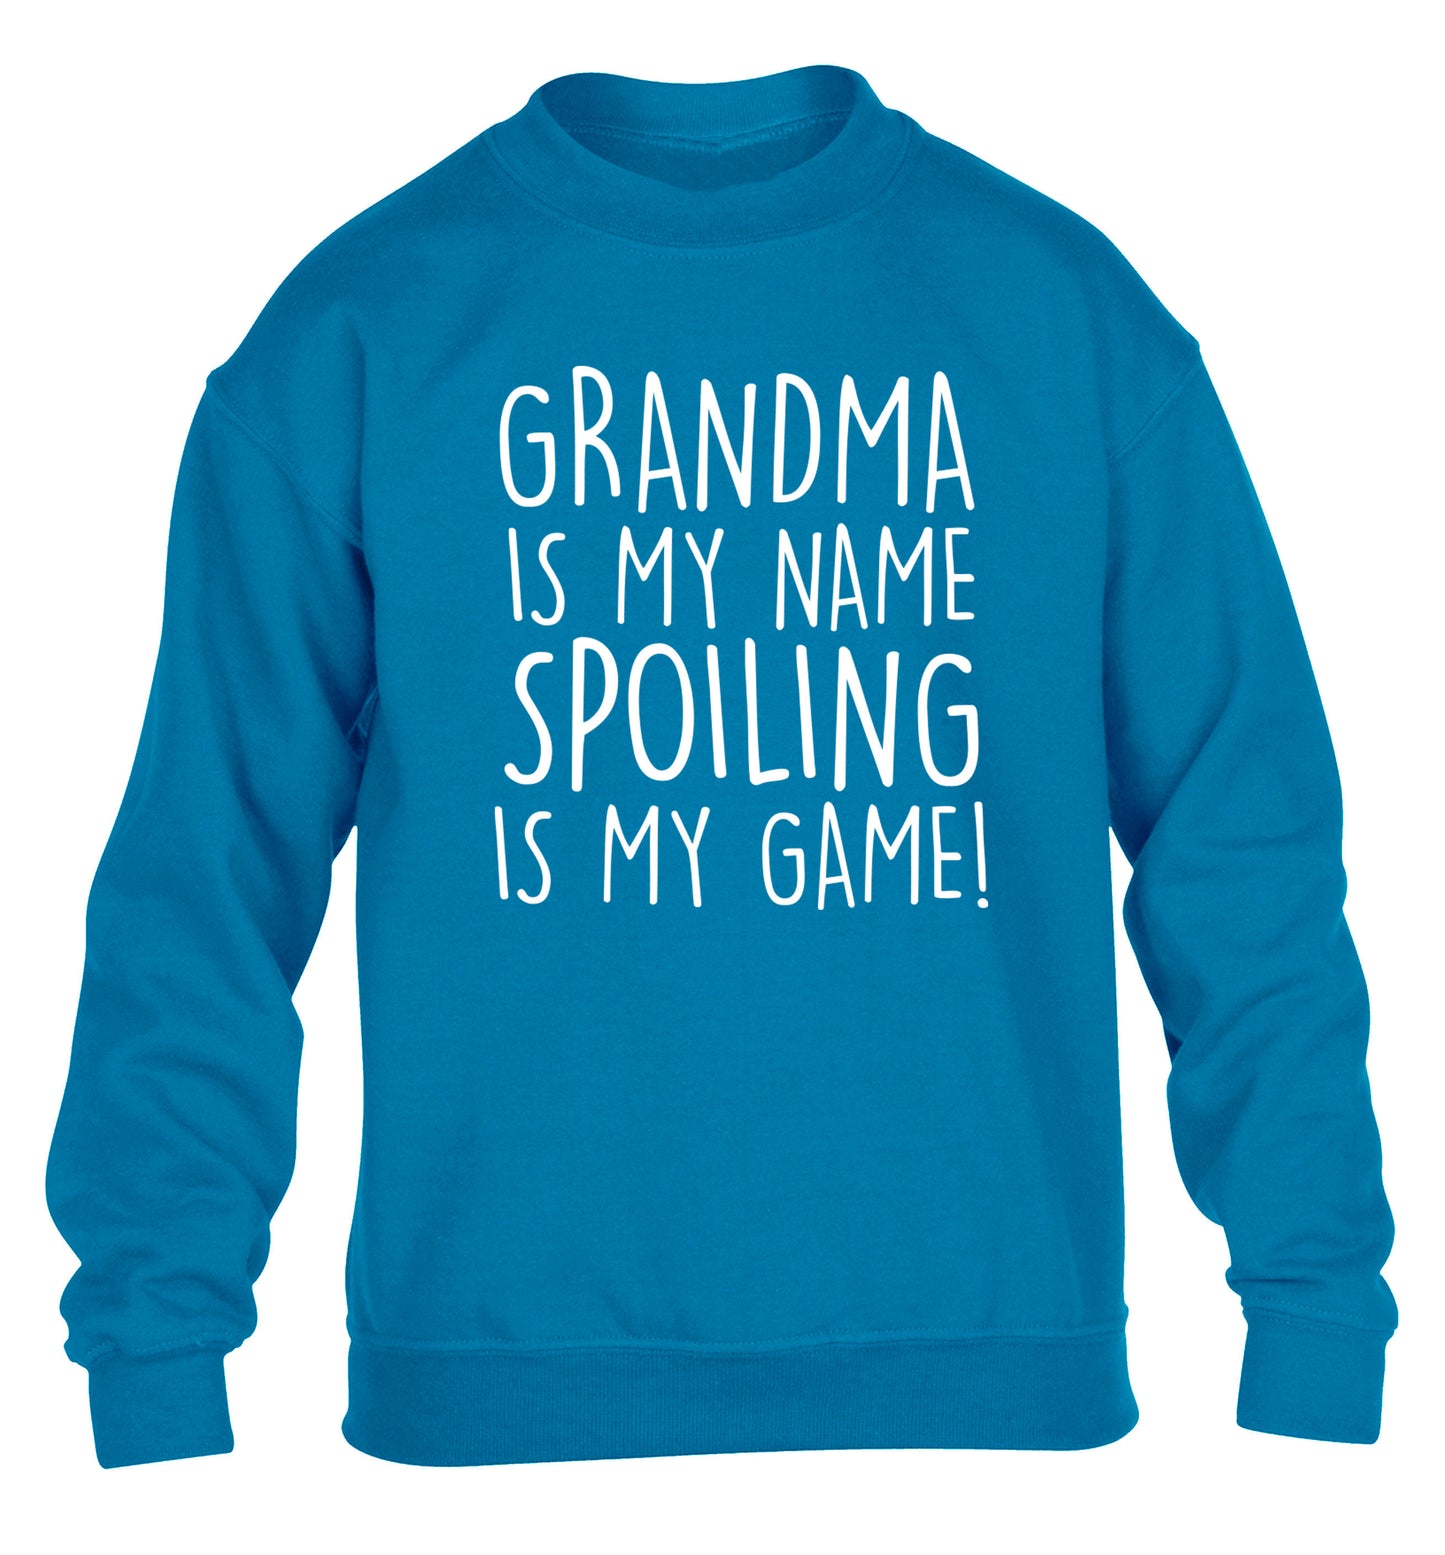 Grandma is my name, spoiling is my game children's blue sweater 12-14 Years